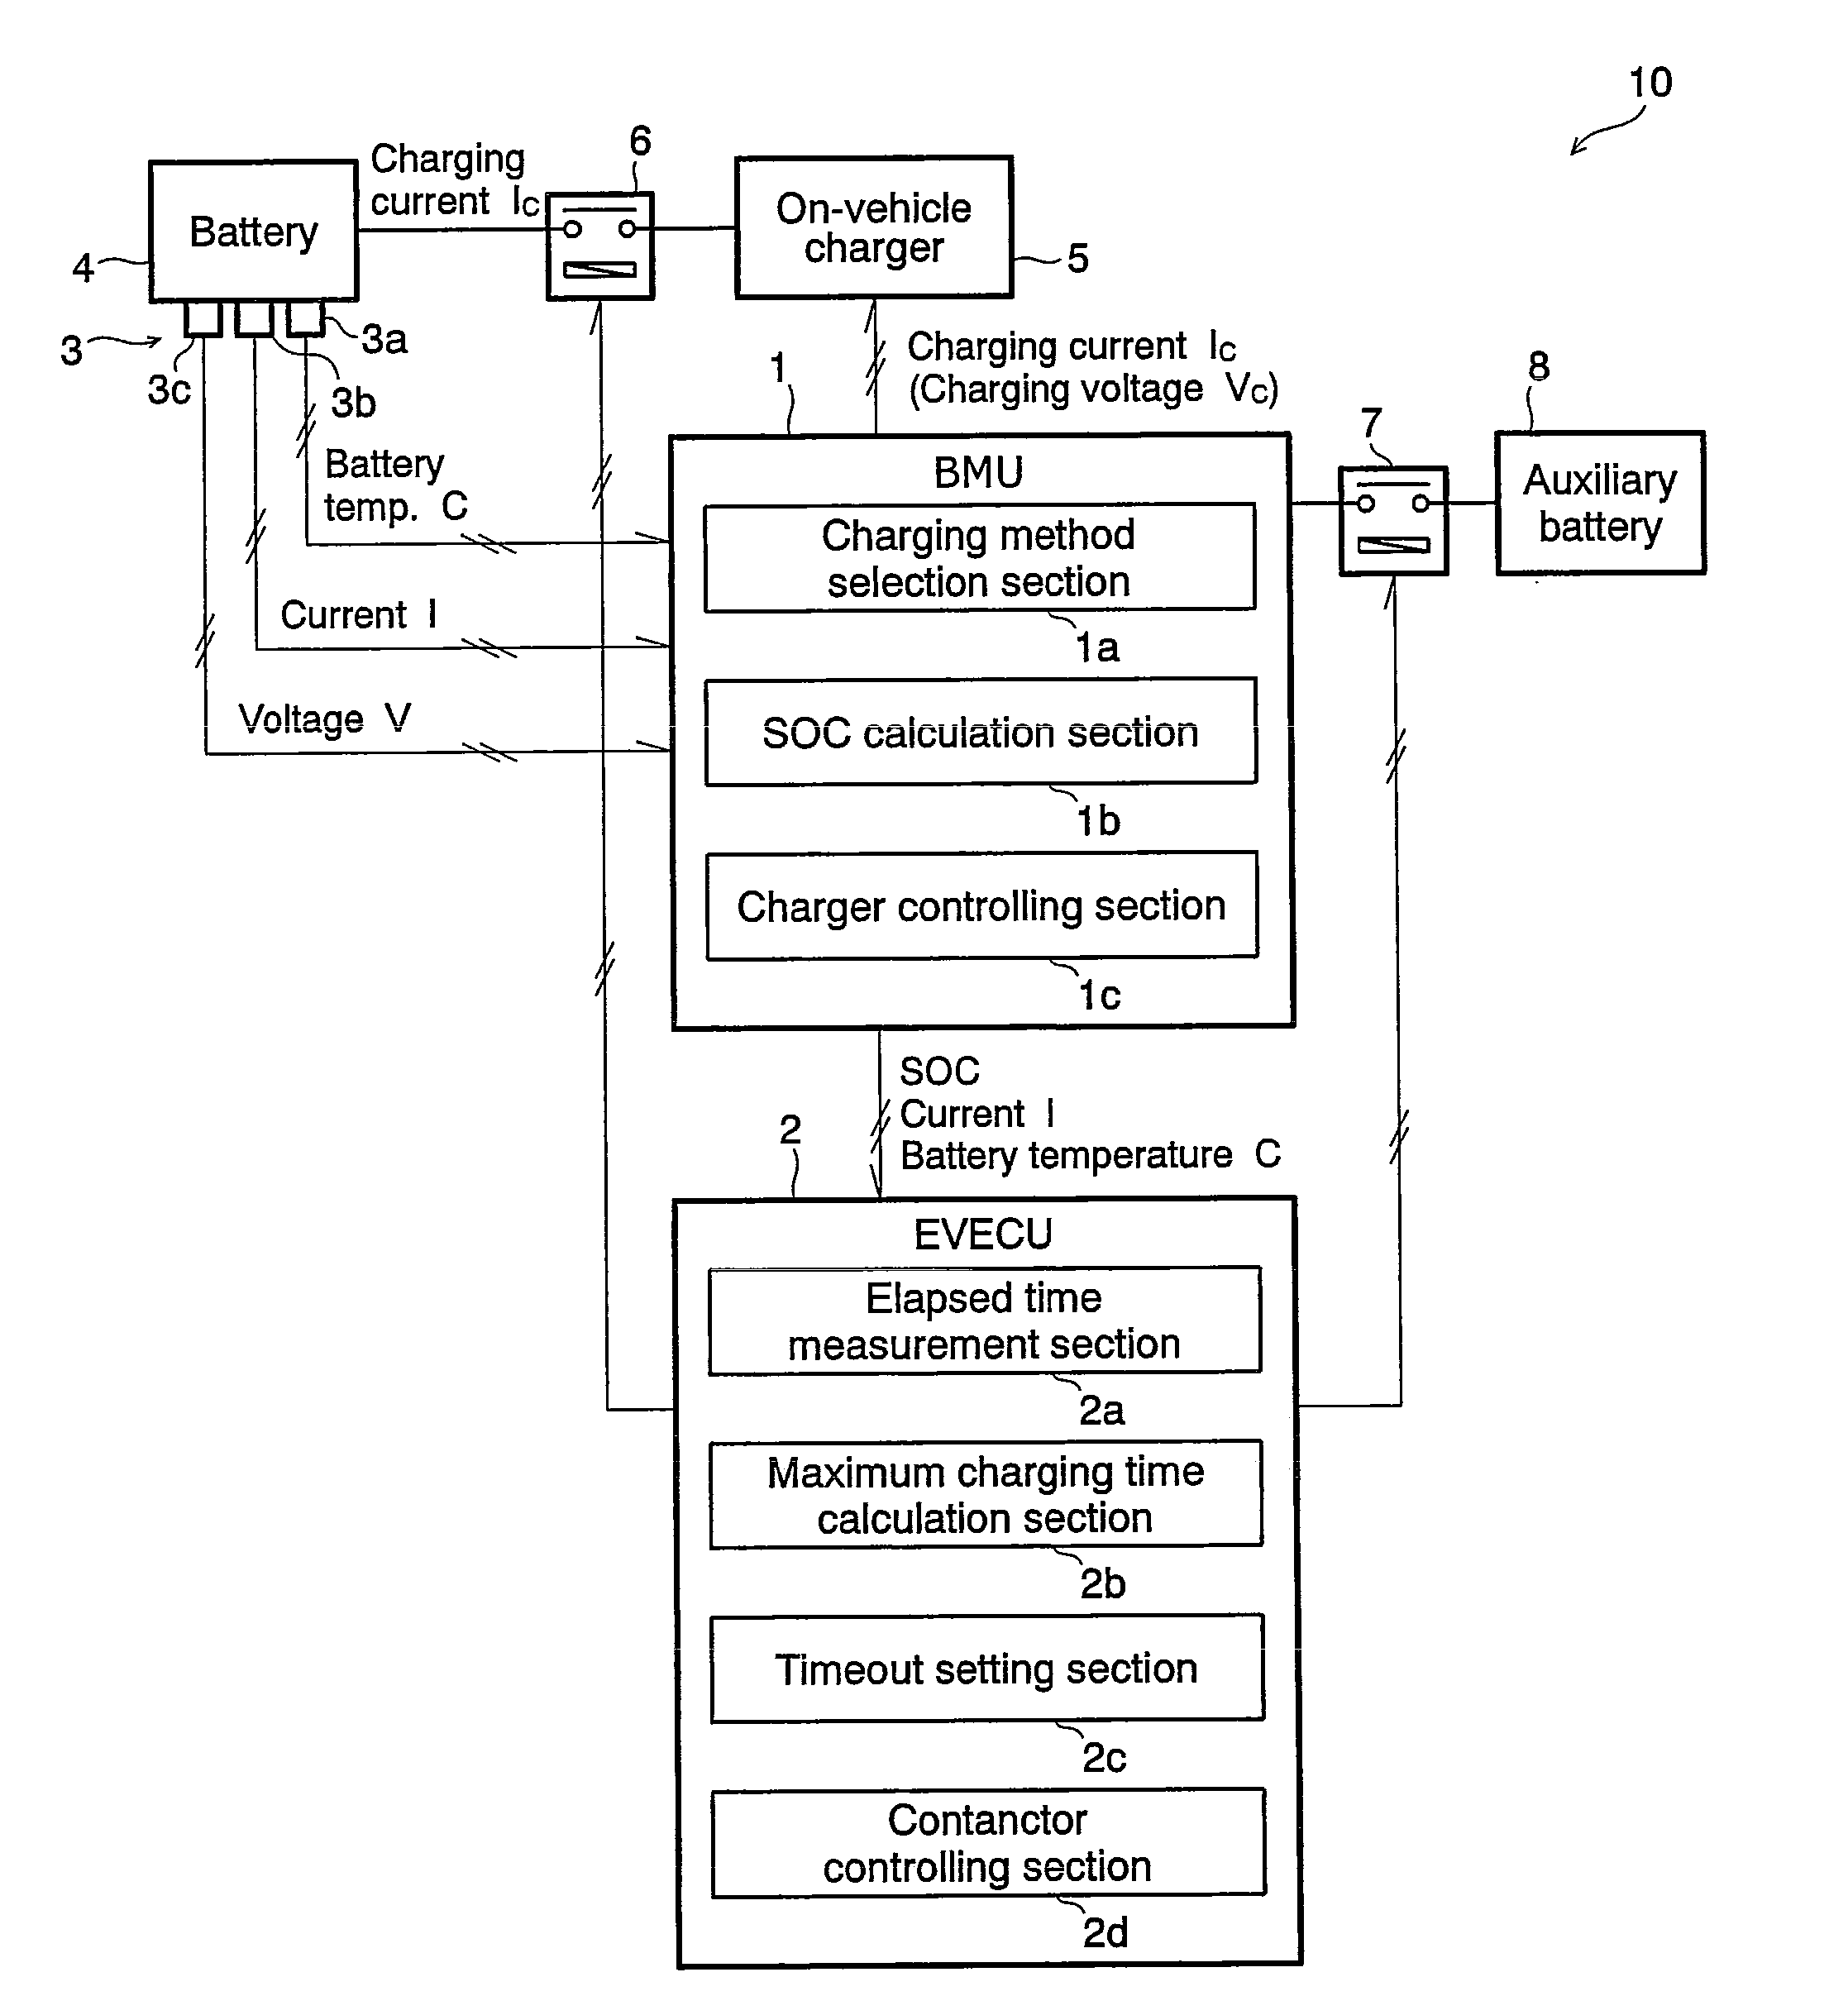 Battery controlling apparatus for a vehicle